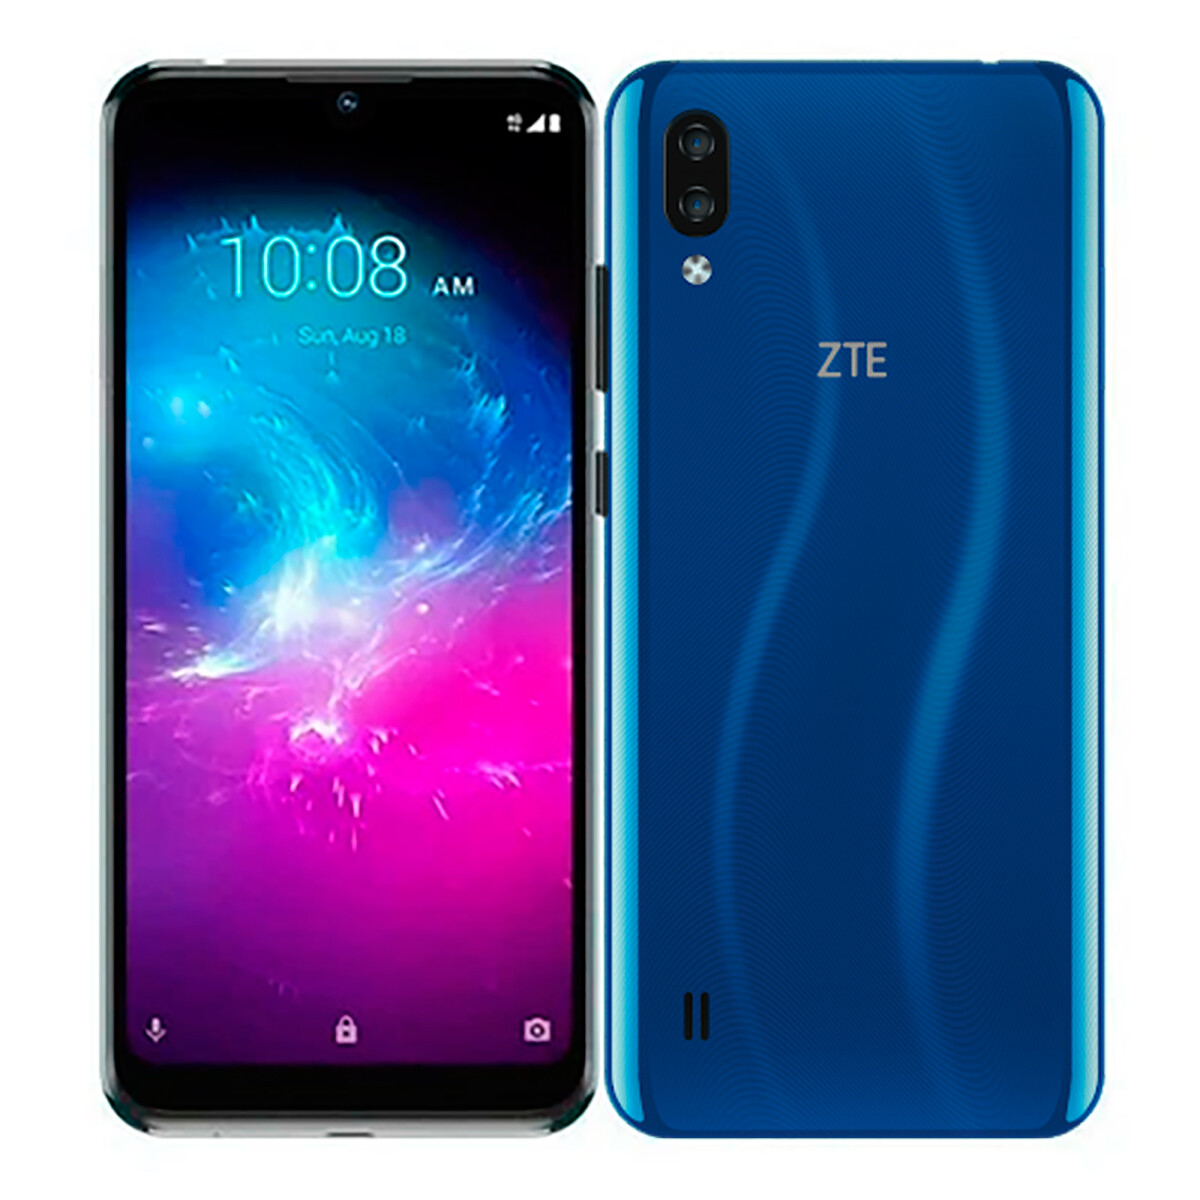 Zte - Smartphone Blade A5 (2020) - 6,08" Multitáctil ips Lcd. 2G. 3G. 4G. Octa Core. Android. Ram 2G - 001 